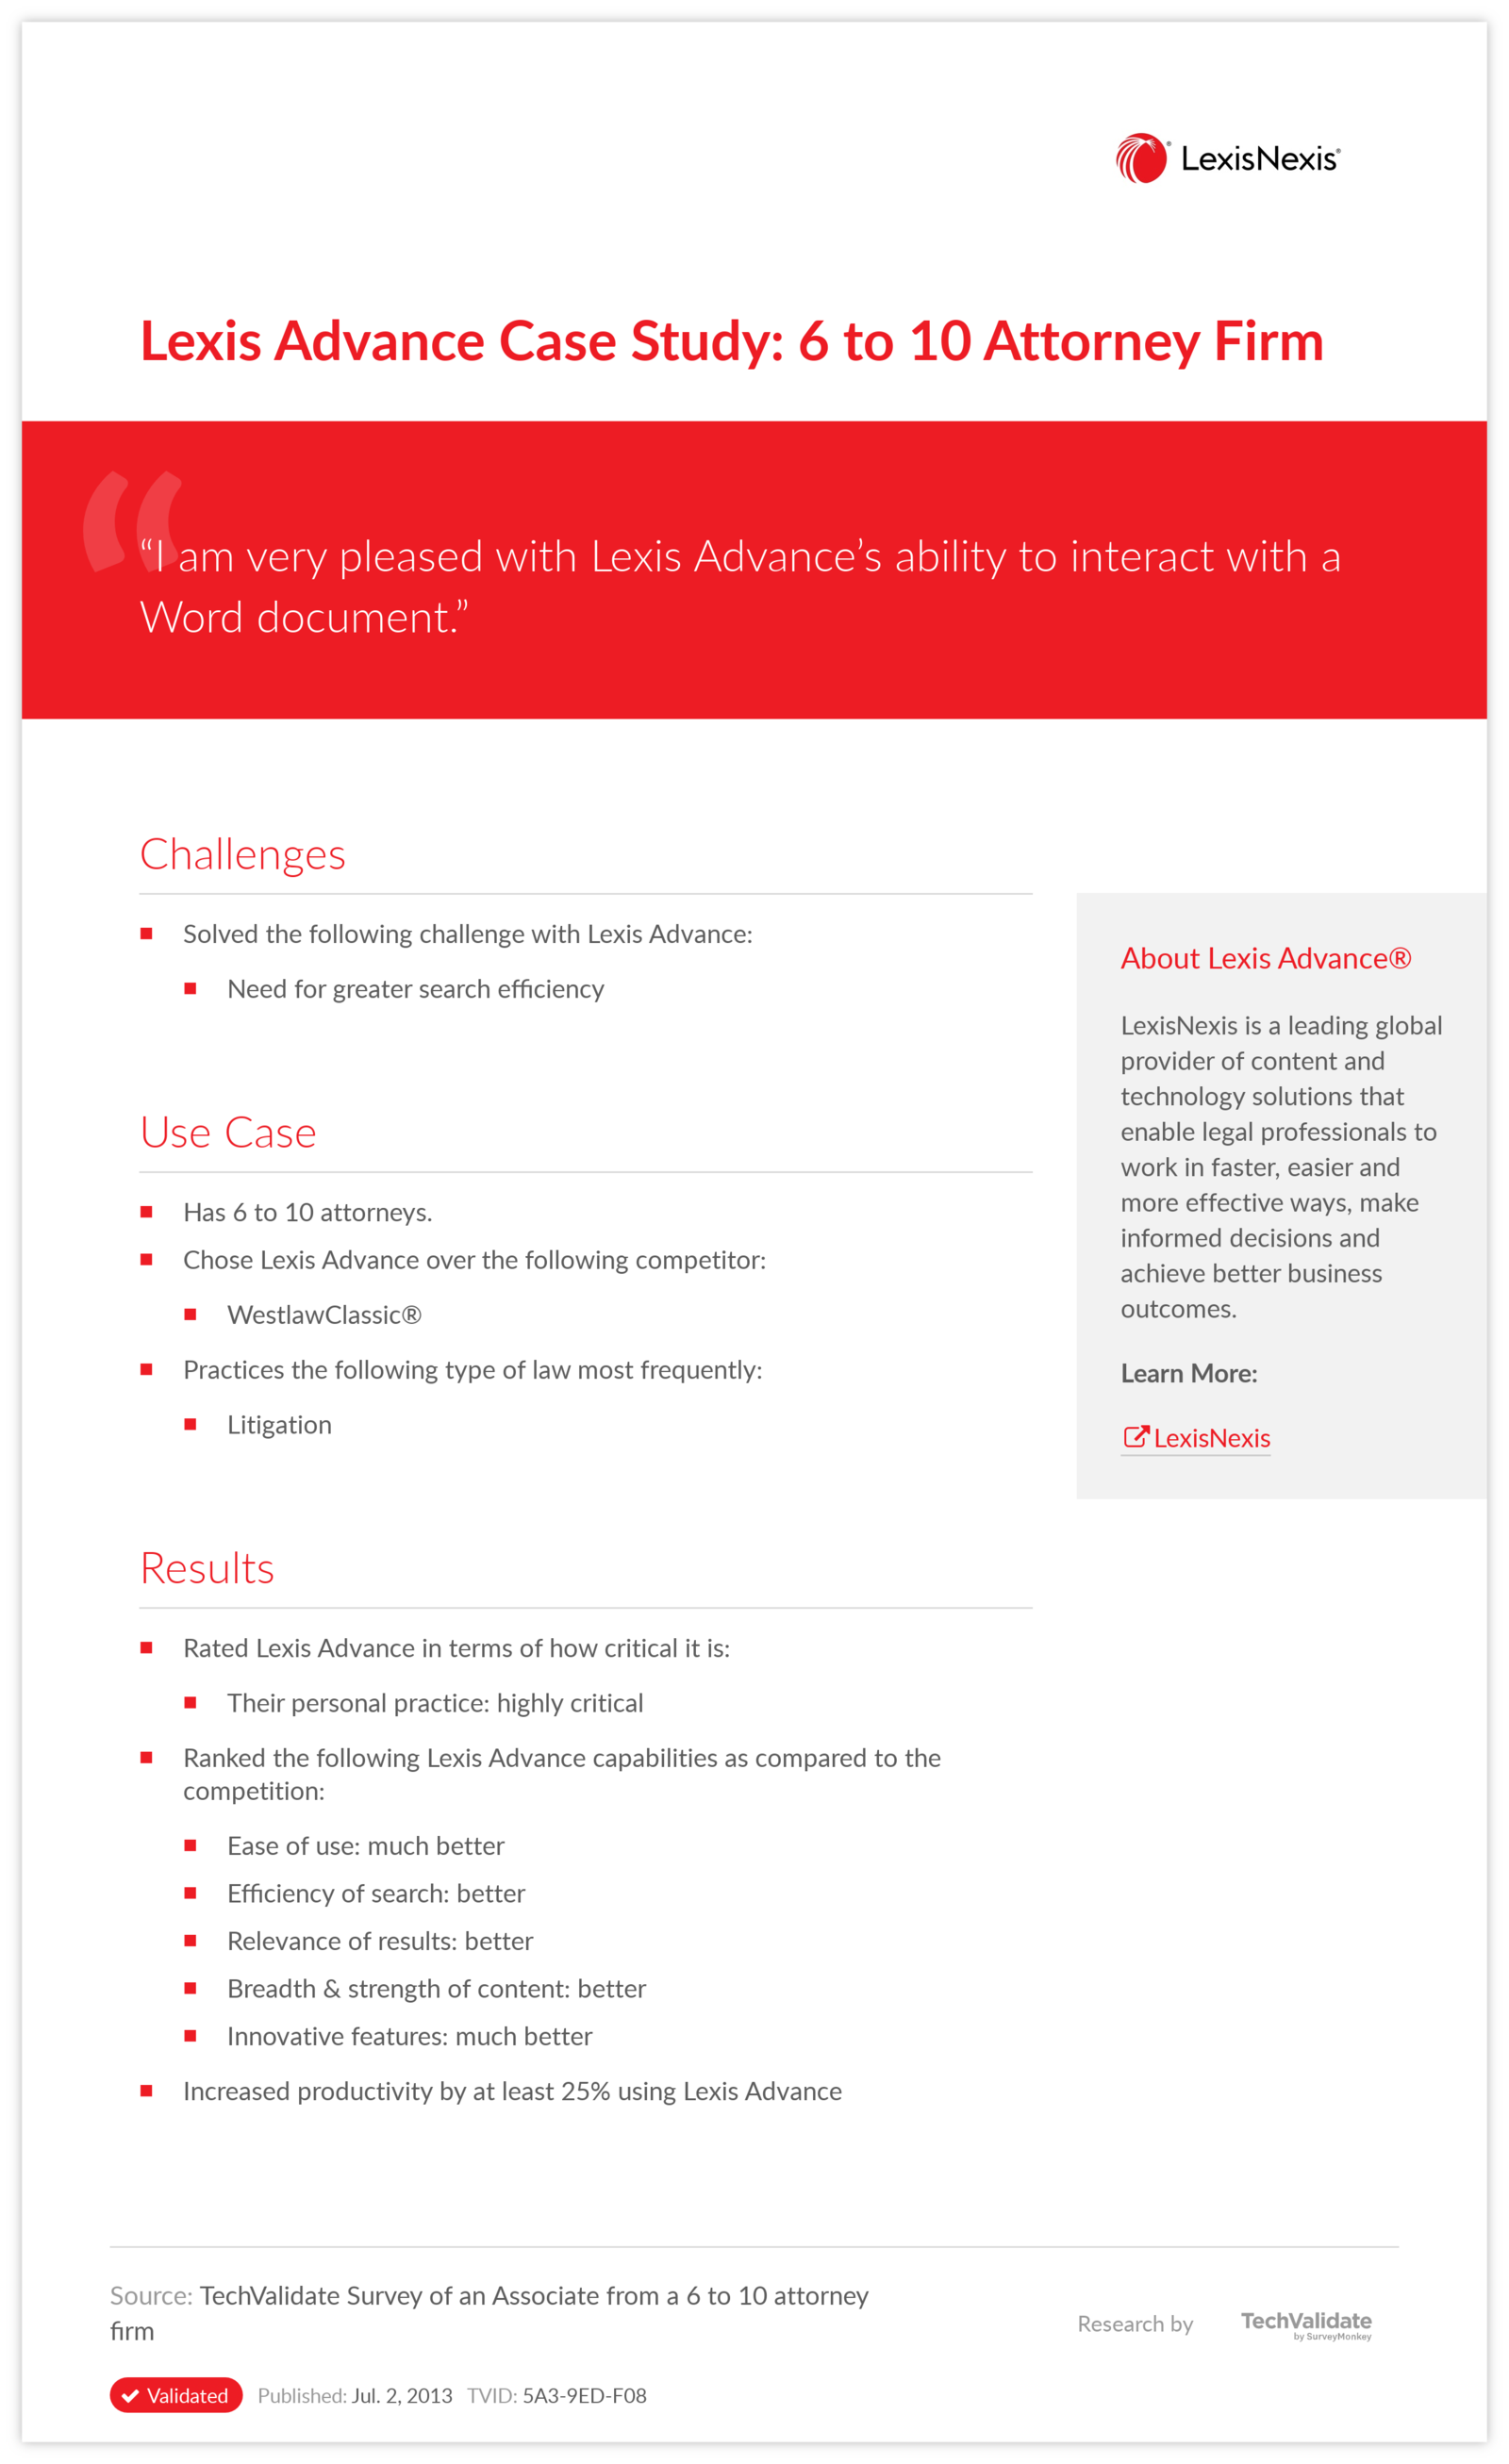 Lexis Advance Case Study: 6 to 10 Attorney Firm